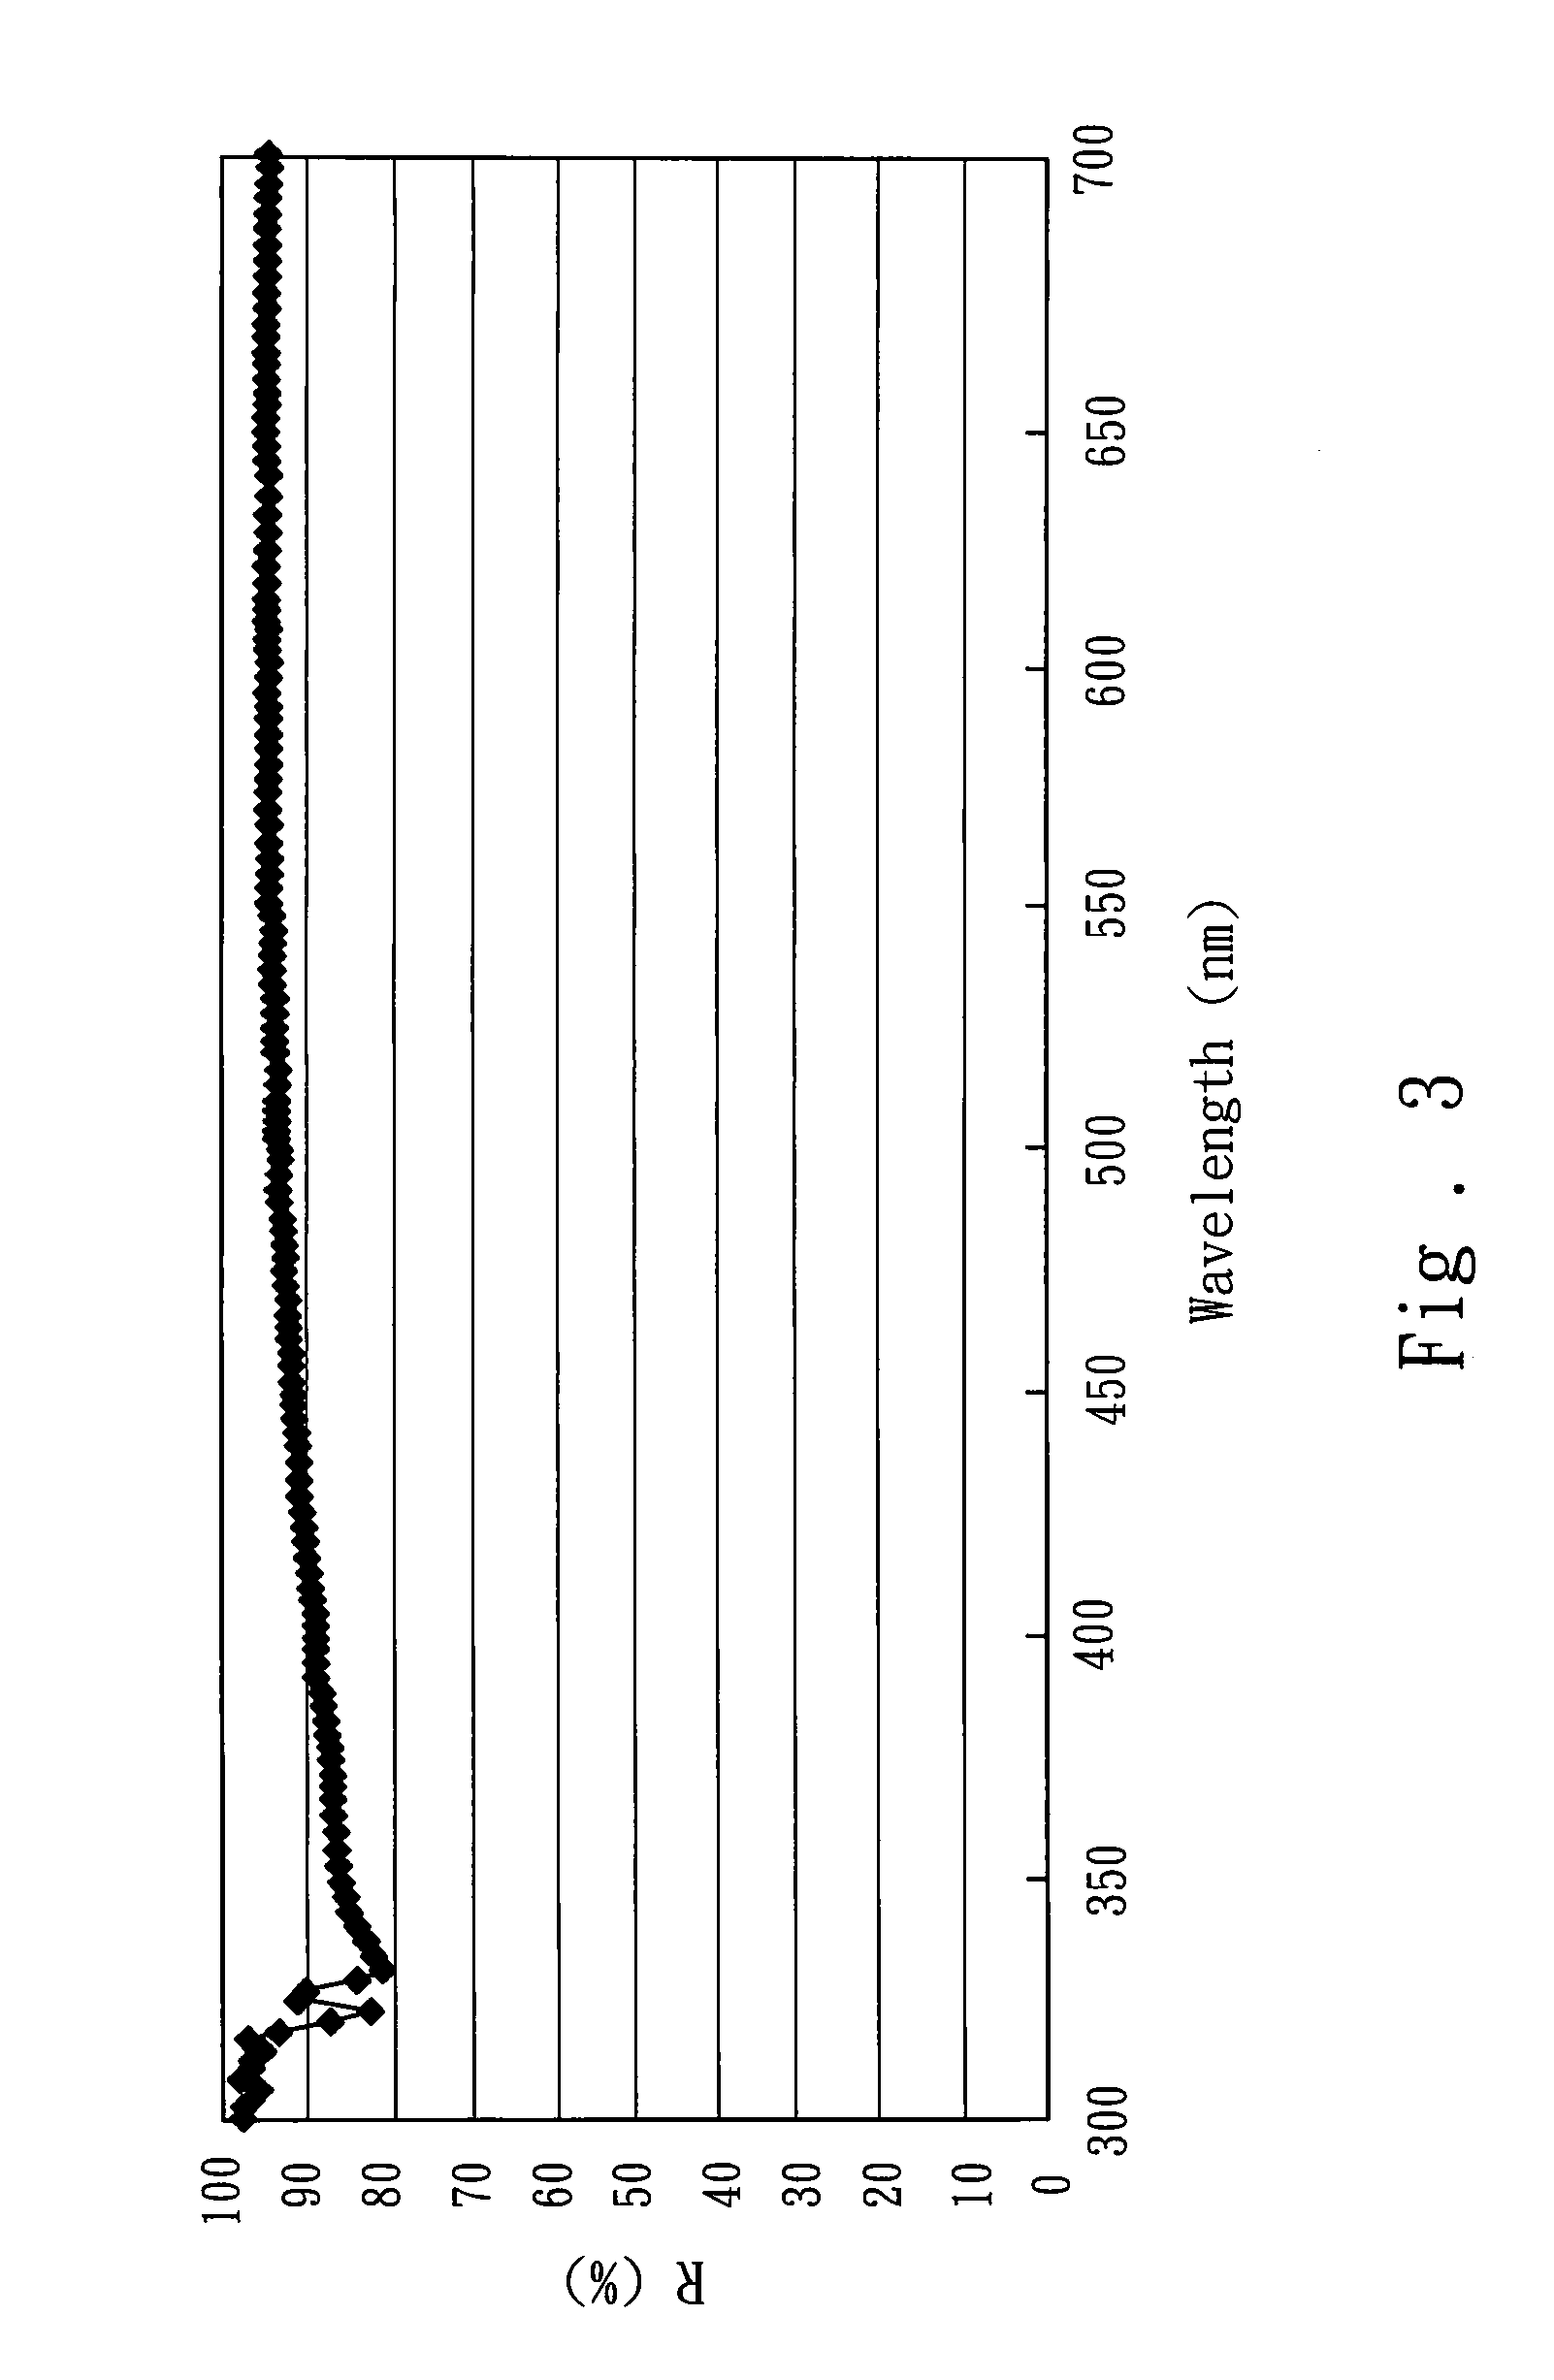 High light-extraction efficiency light-emitting diode structure